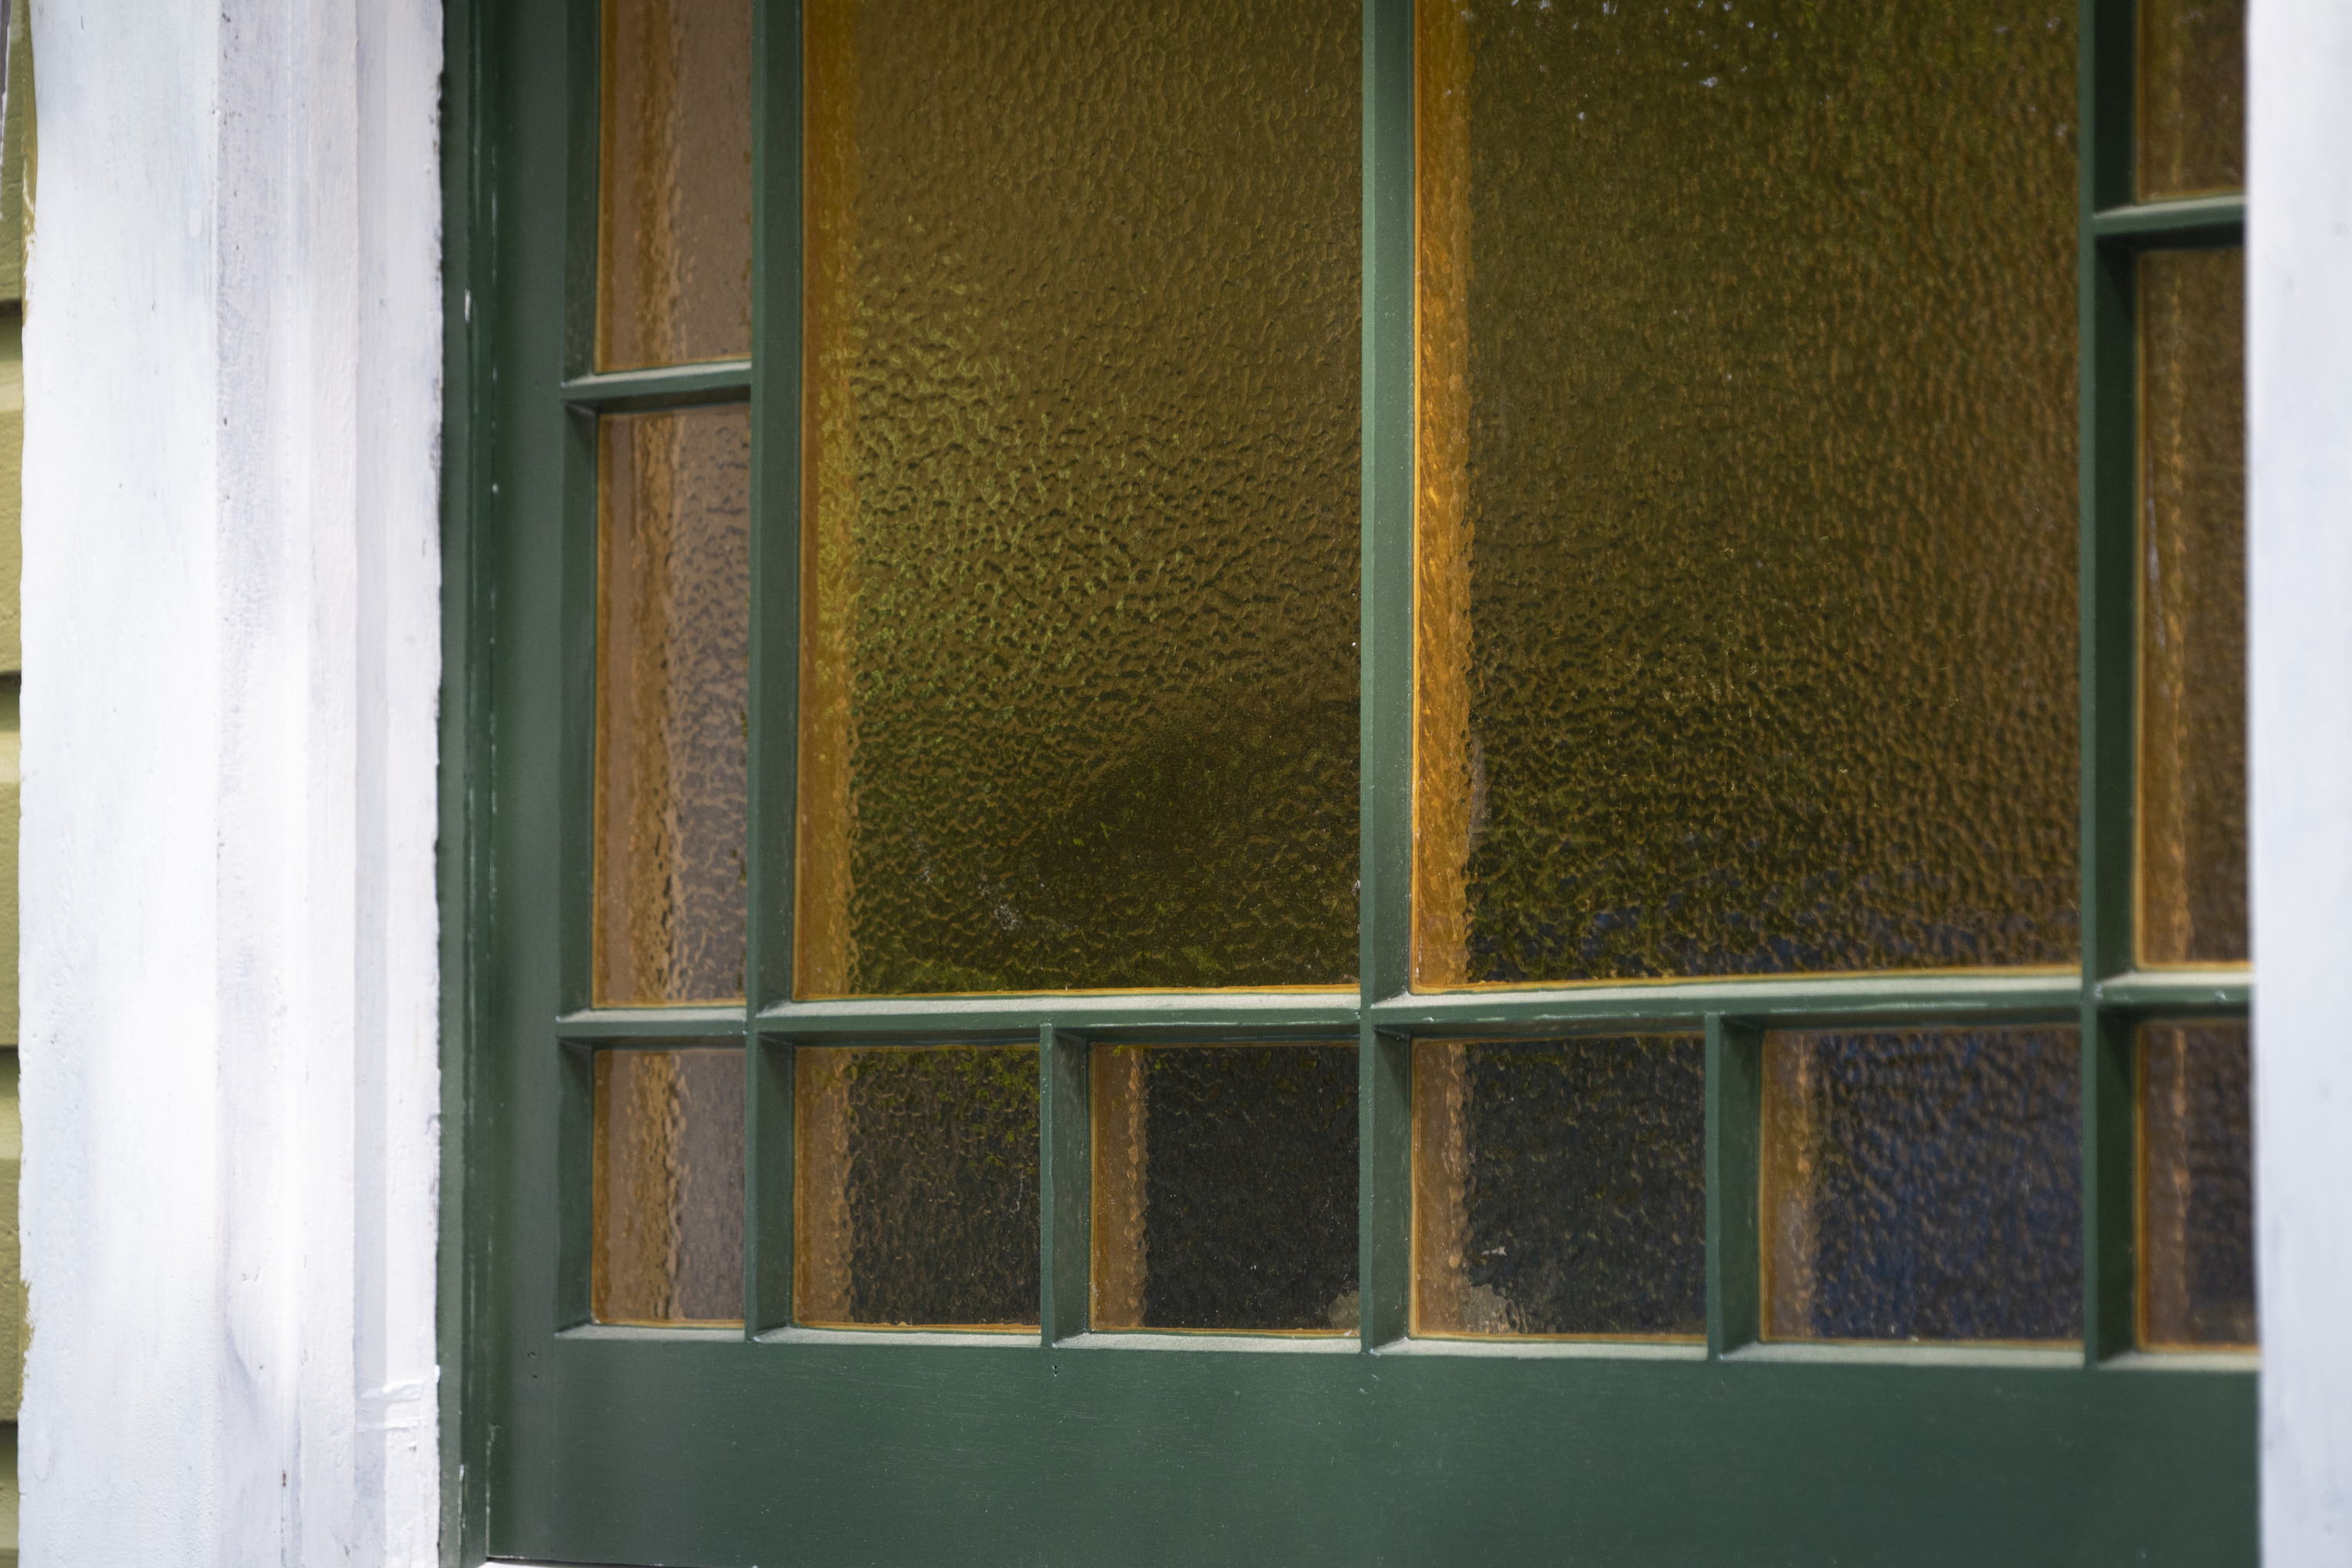 A textured yellow glass window in a dark green frame.